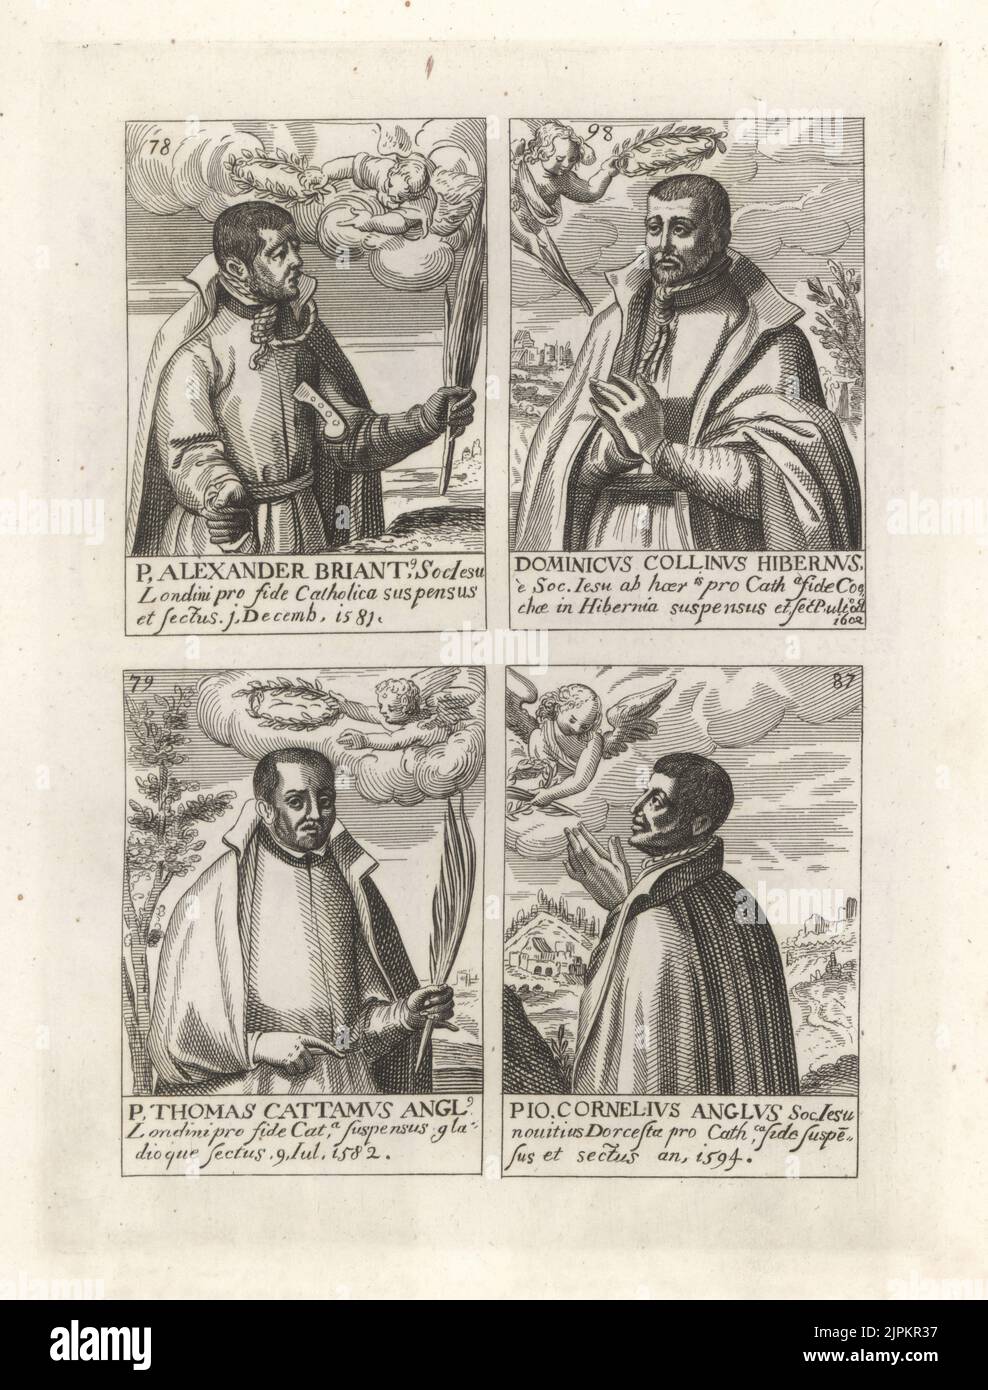 Portraits of Jesuit martyrs, English and Scottish Catholics killed in the 16th century. Shown receiving martyr's crowns from angels, three with hangman's noose. Alexander Briant 1581, Dominic Collins 1602, Thomas Cattamus 1582, John Cornelius 1594. Copperplate engraving from Samuel Woodburn’s Gallery of Rare Portraits Consisting of Original Plates, George Jones, 102 St Martin’s Lane, London, 1816. Stock Photo